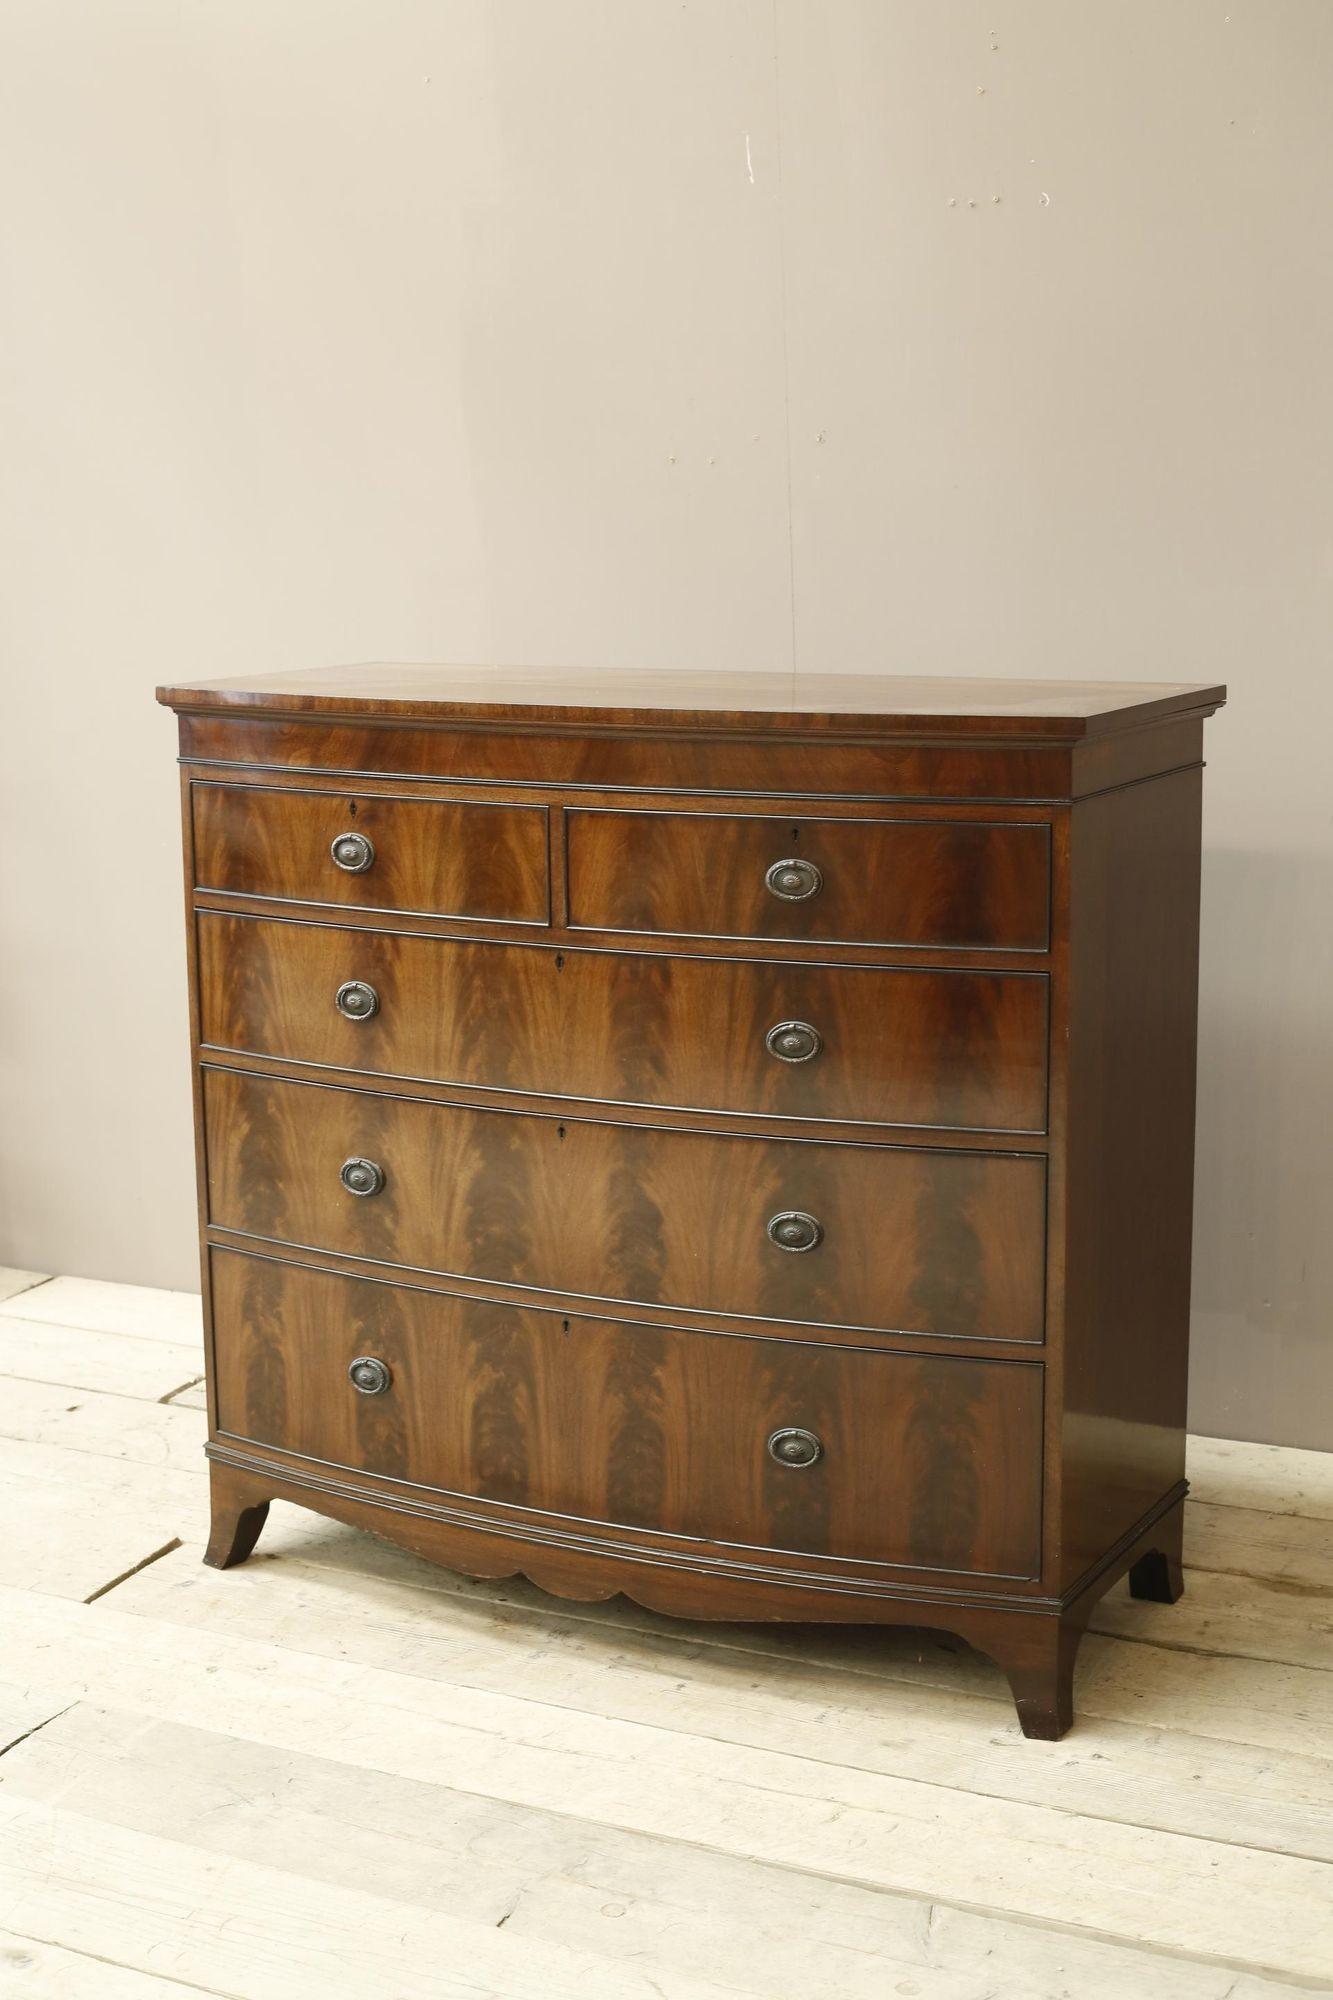 This a very high quality late Victorian early Edwardian flame mahogany chest of drawers by renowned Leeds furniture manufacturers Marsh, Jones & Cribb. The quality is very high with ebony banding and and beading which is a lovely contrast to the